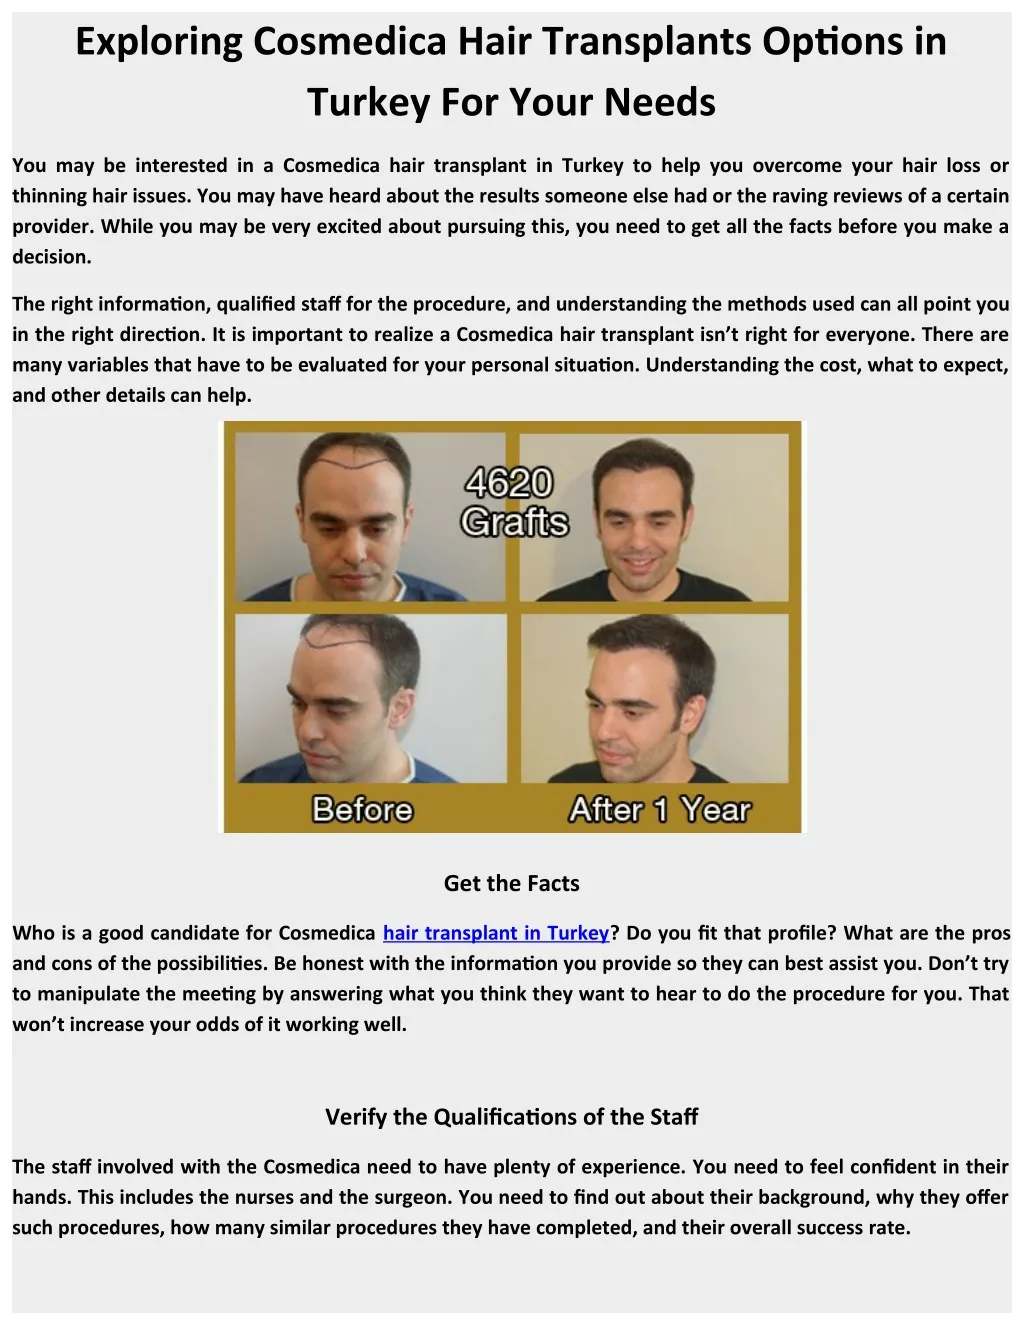 PPT - Exploring Cosmedica Hair Transplants Options in Turkey For Your Needs  PowerPoint Presentation - ID:8014195